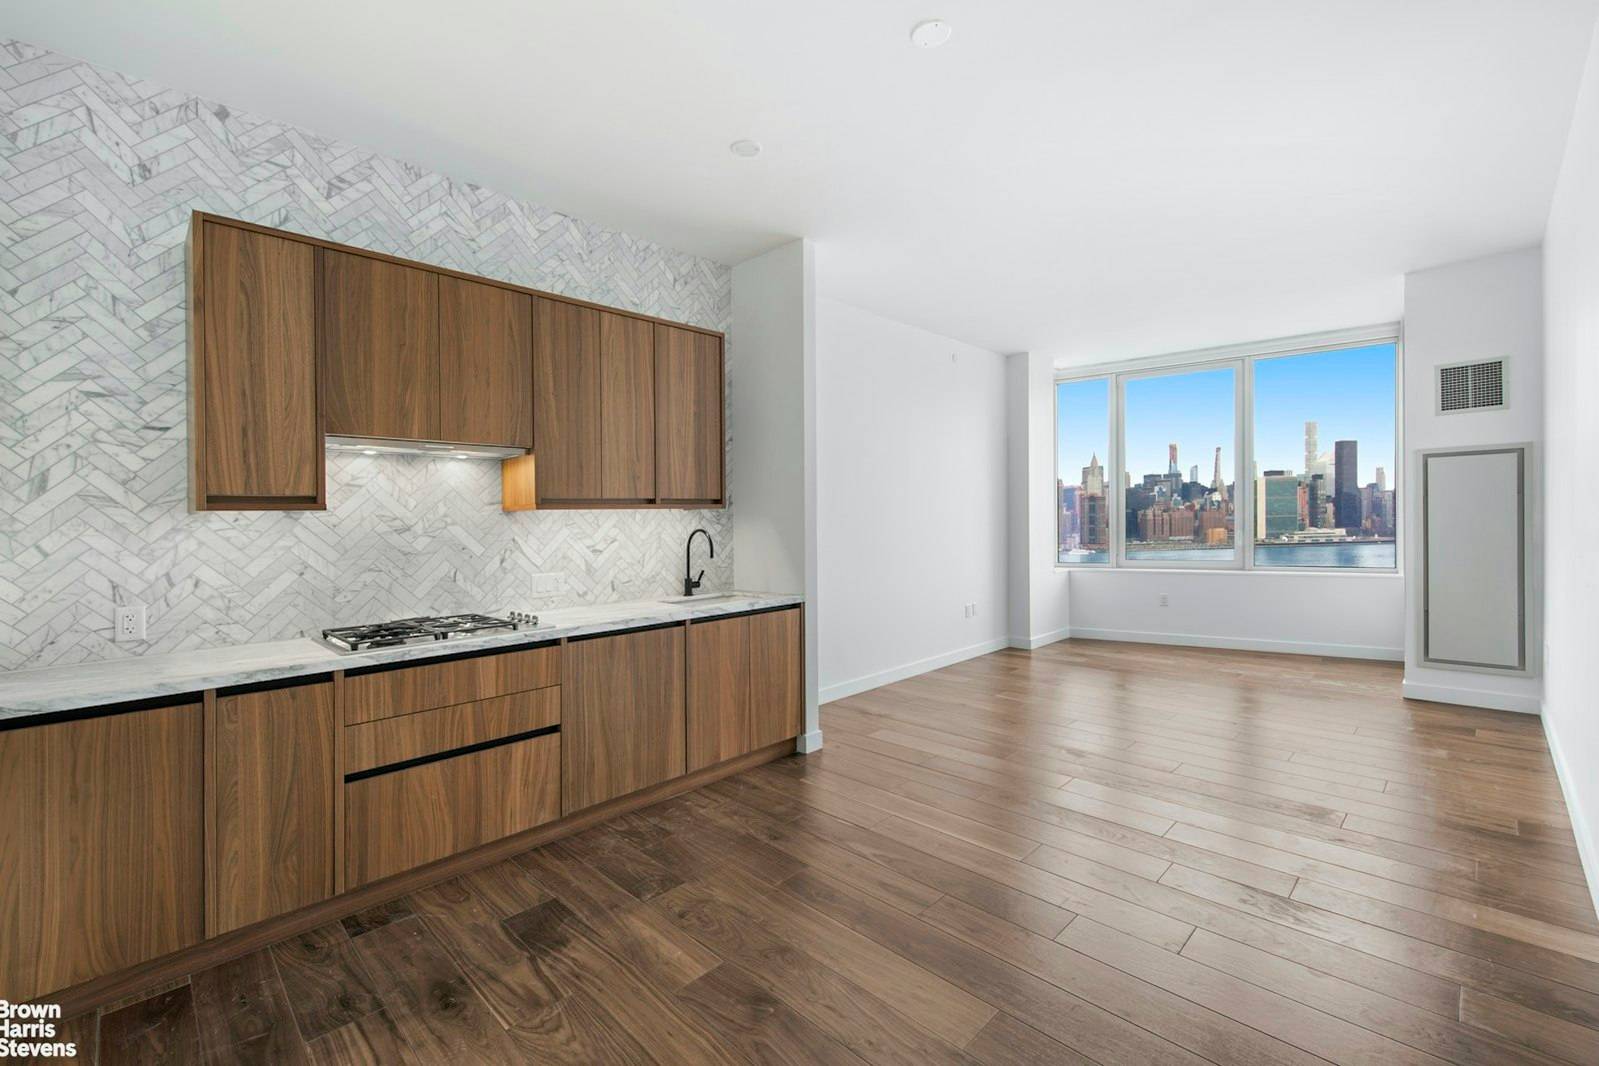 With the NYC Ferry service practically at your doorstep and the subway just two blocks away, The Greenpoint at 21 India Street, a luxury waterfront condominium, is perfectly located !